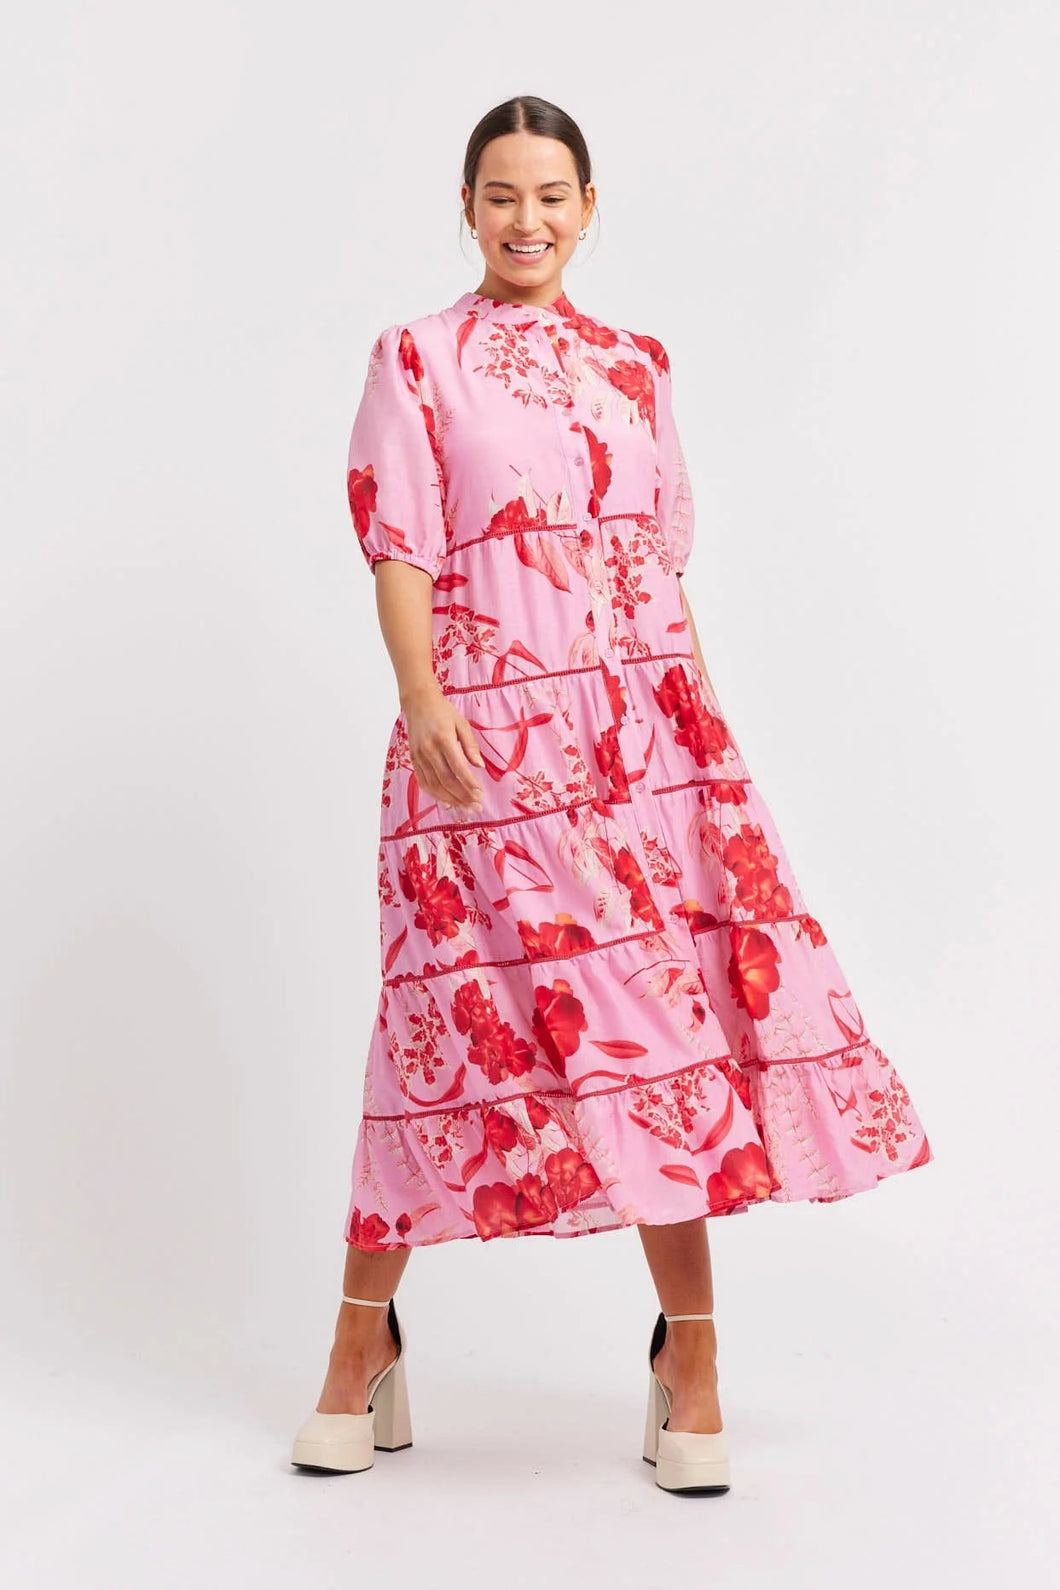 Martina Cotton Silk Dress in Lolly by Alessandra